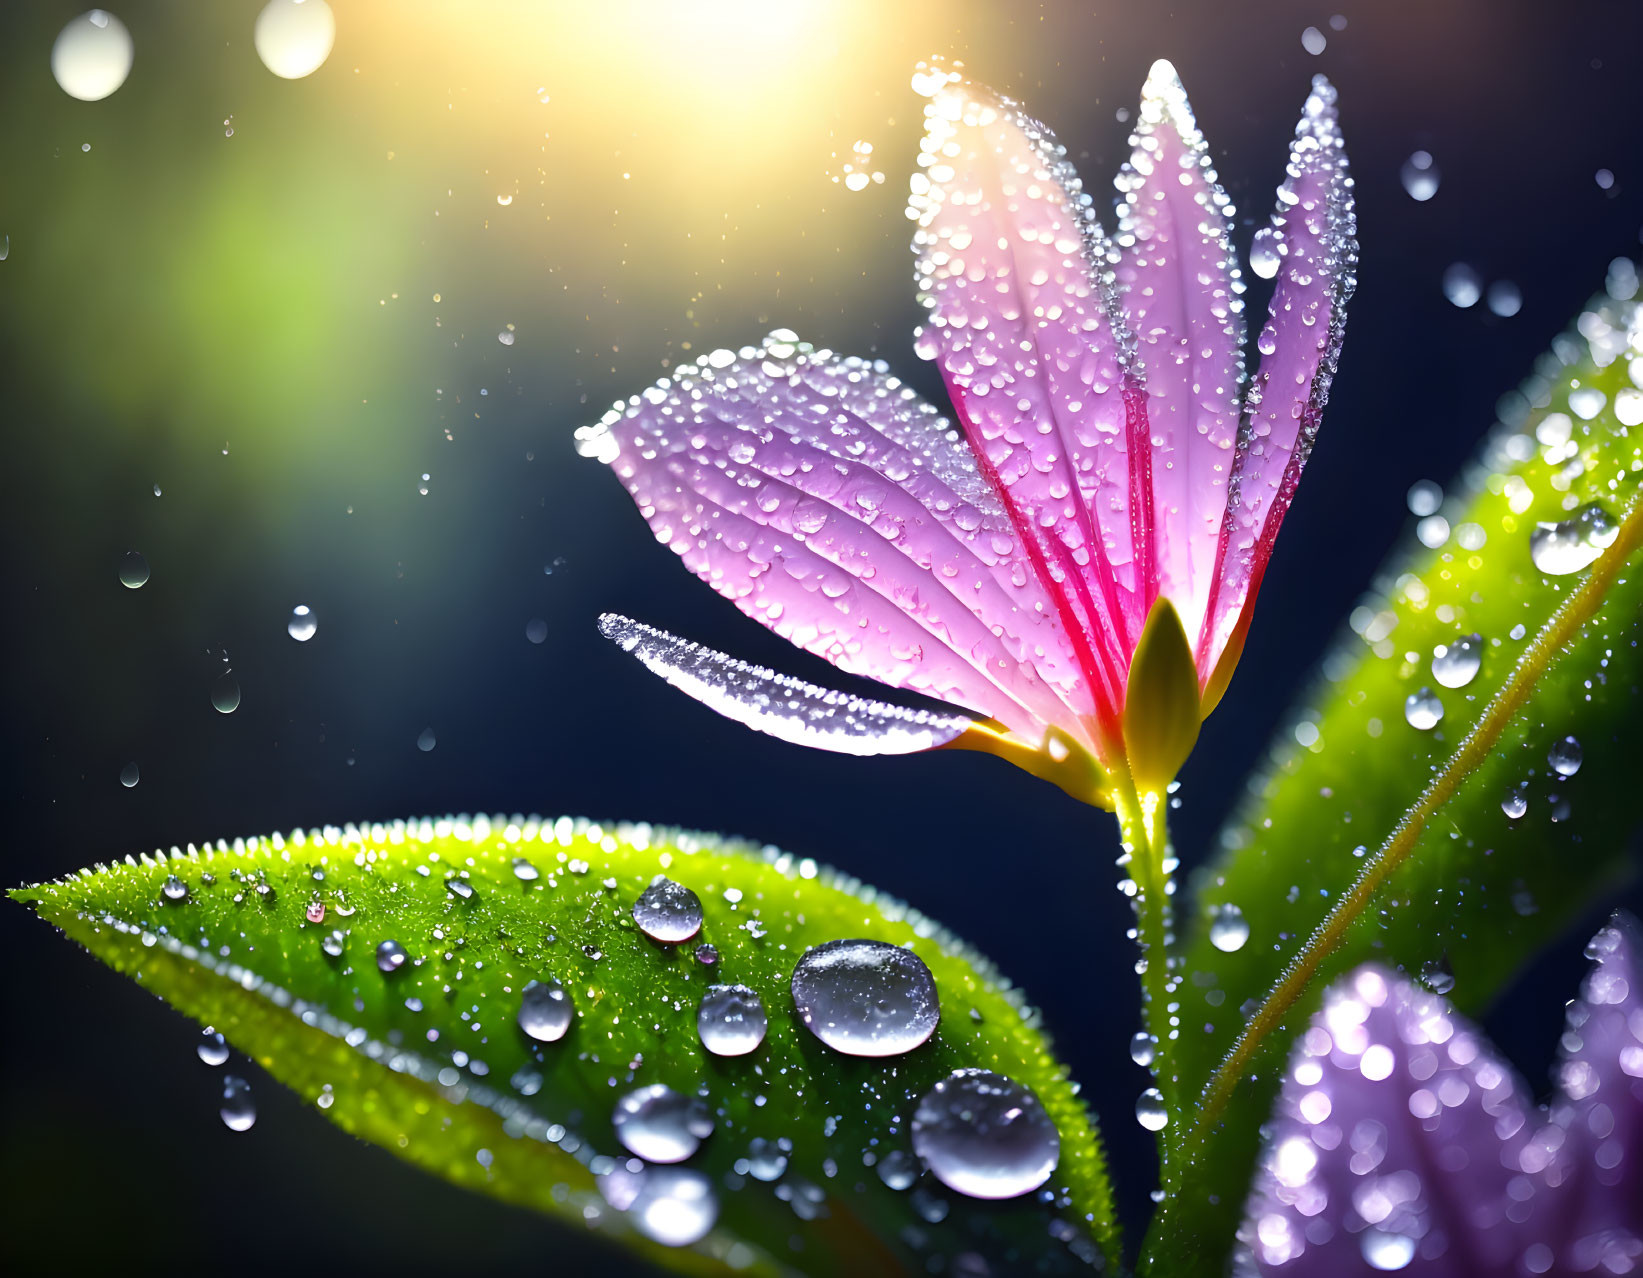 Pink Flower and Dew Drops in Sunlight with Bokeh Effect